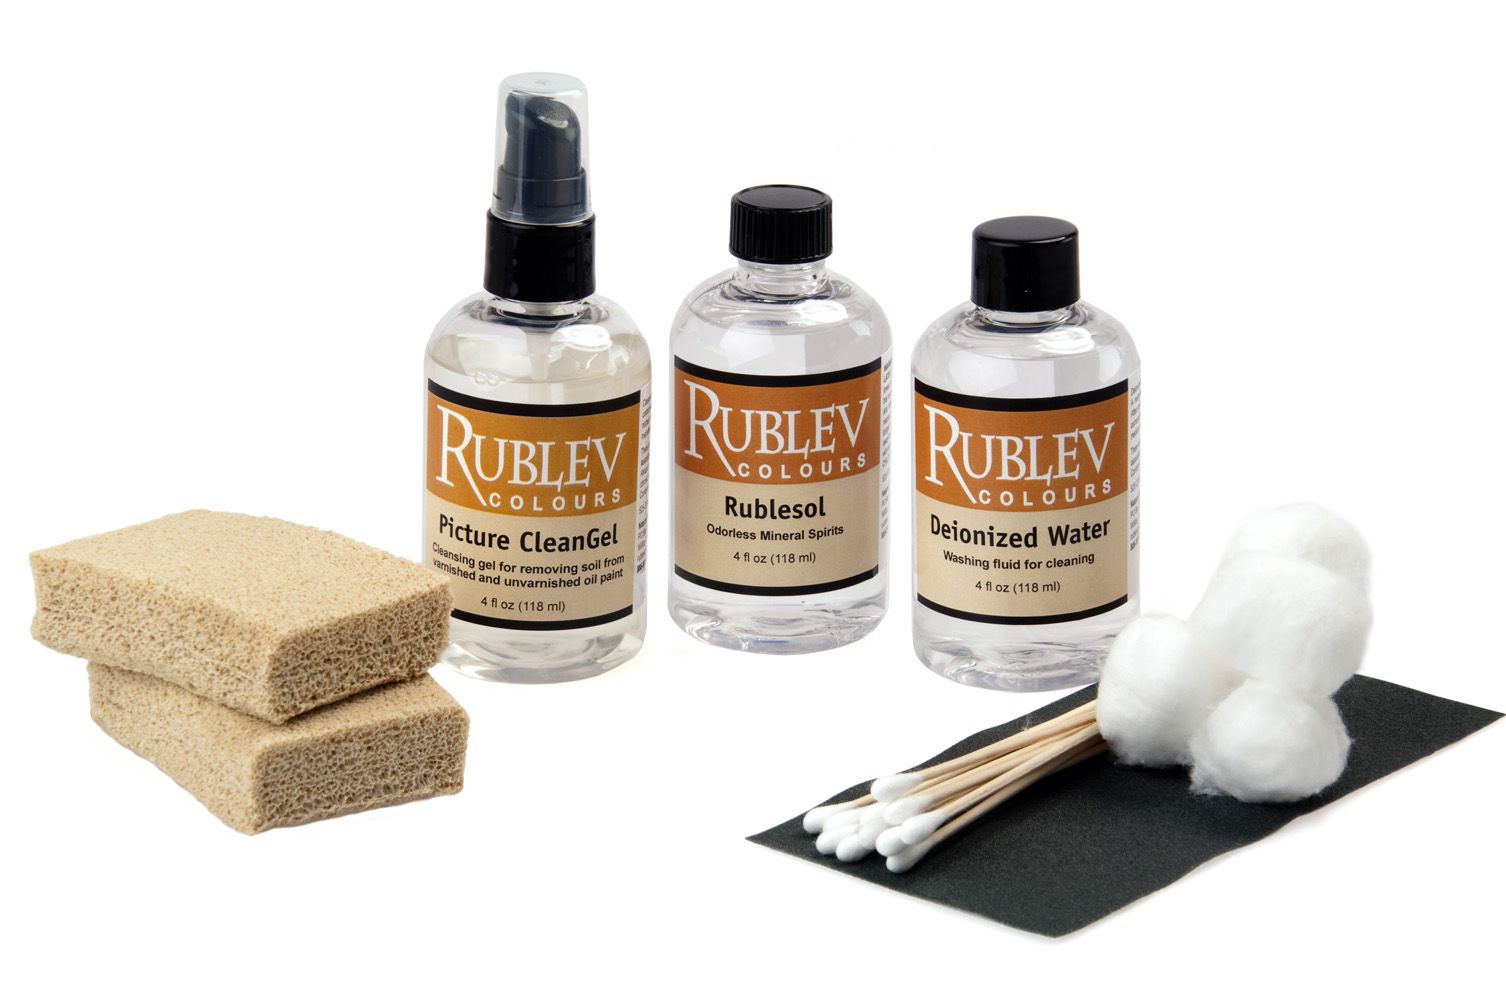 Rublev Colours Mini Picture Cleaning Kit